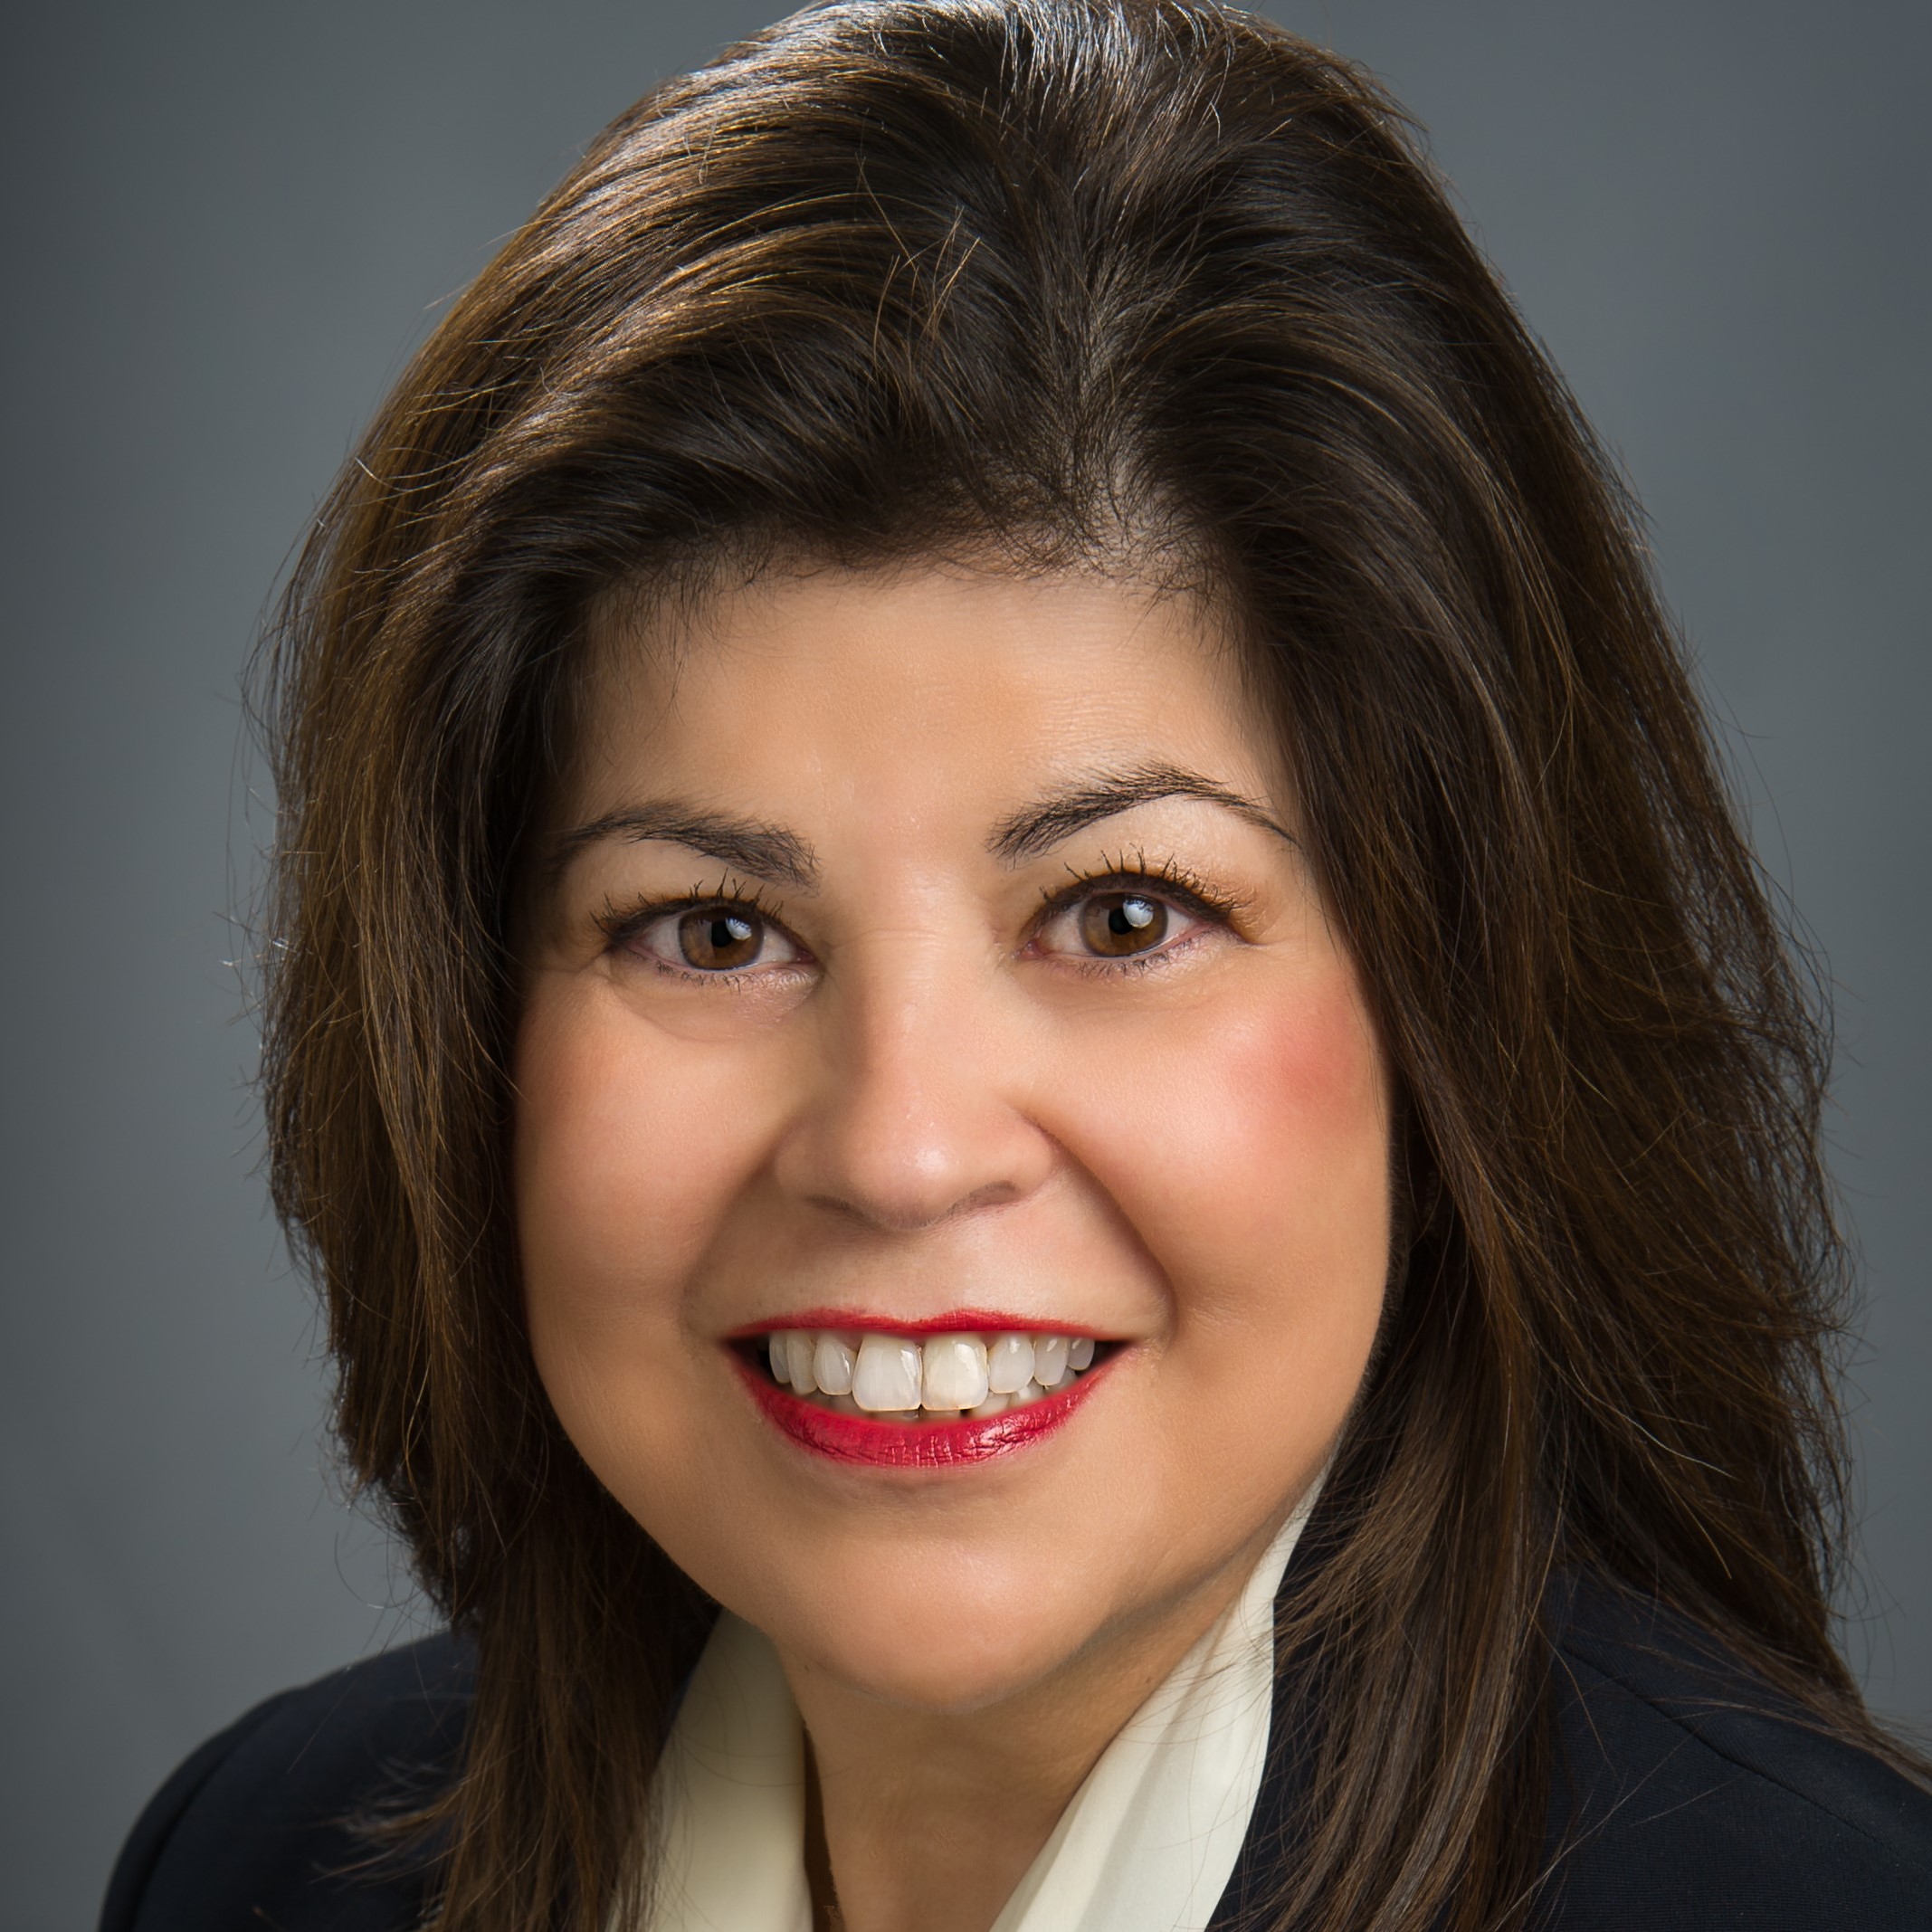 Photo of Rufina Hernández, a Latina woman wearing a blue suit with white shirt, has brown eyes and long dark brown hair. She is smiling.